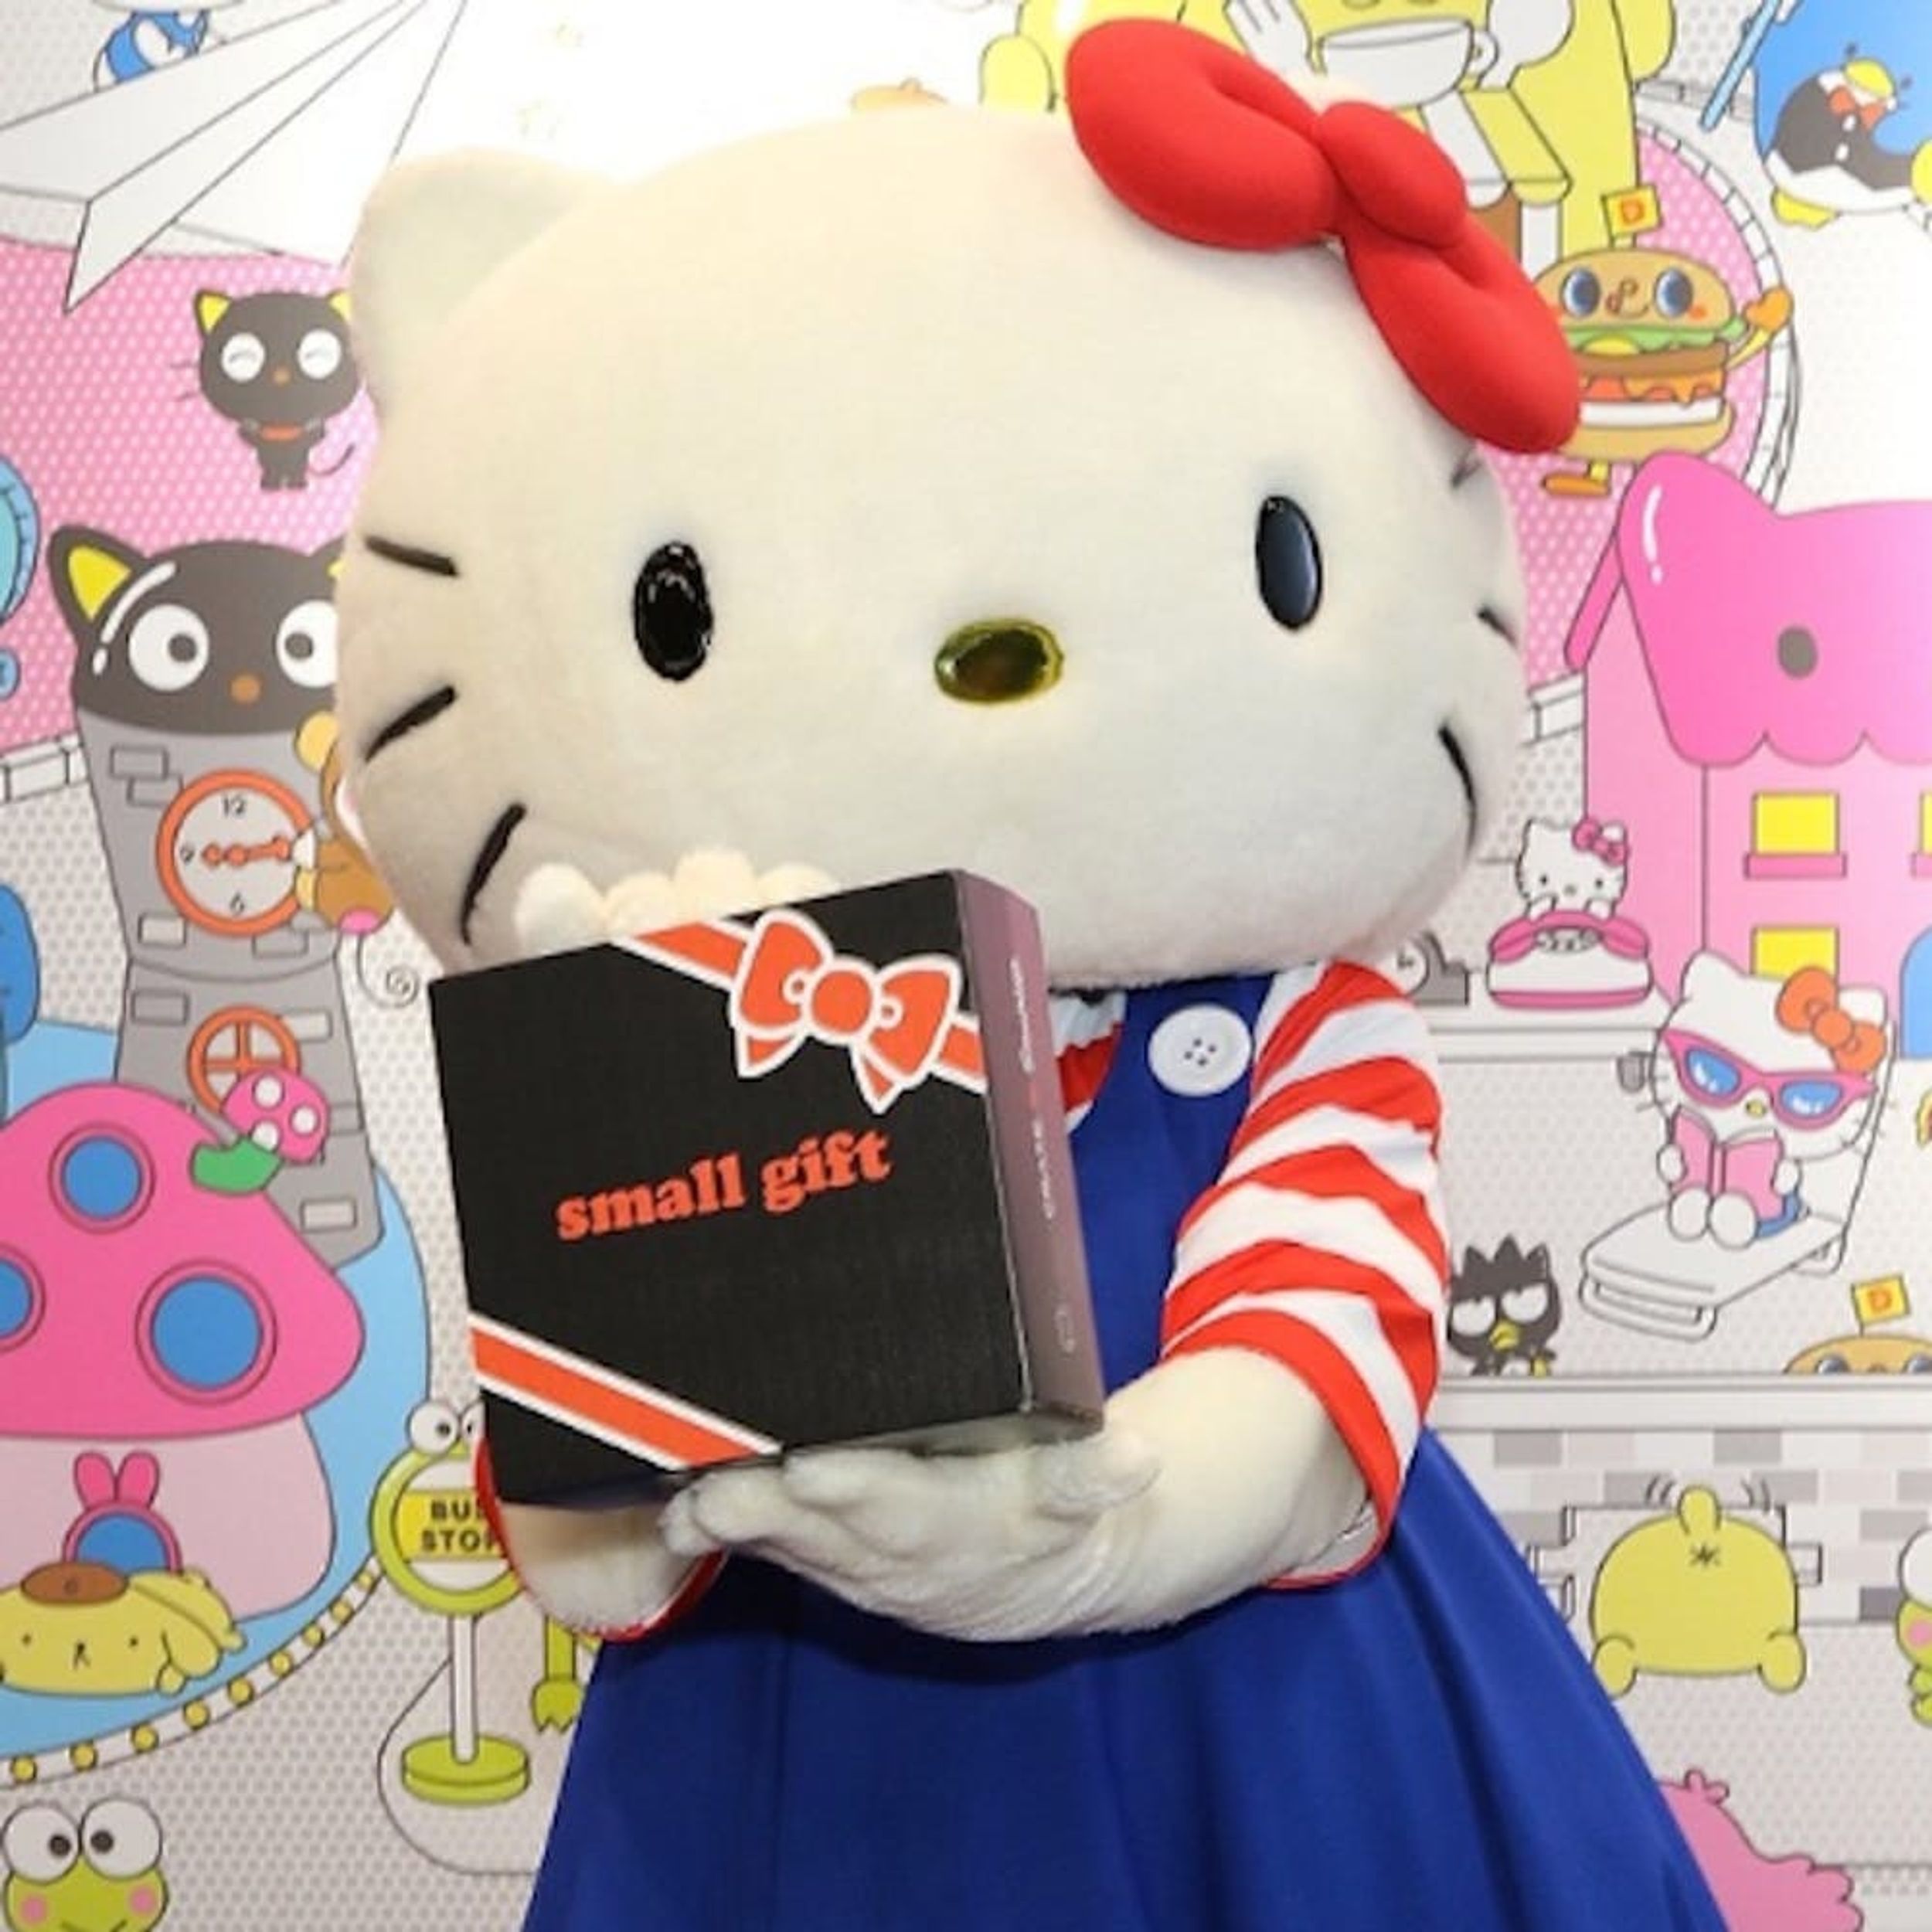 OMG: This Sanrio Subscription Crate Will Officially Be the Cutest Item on Your Christmas List